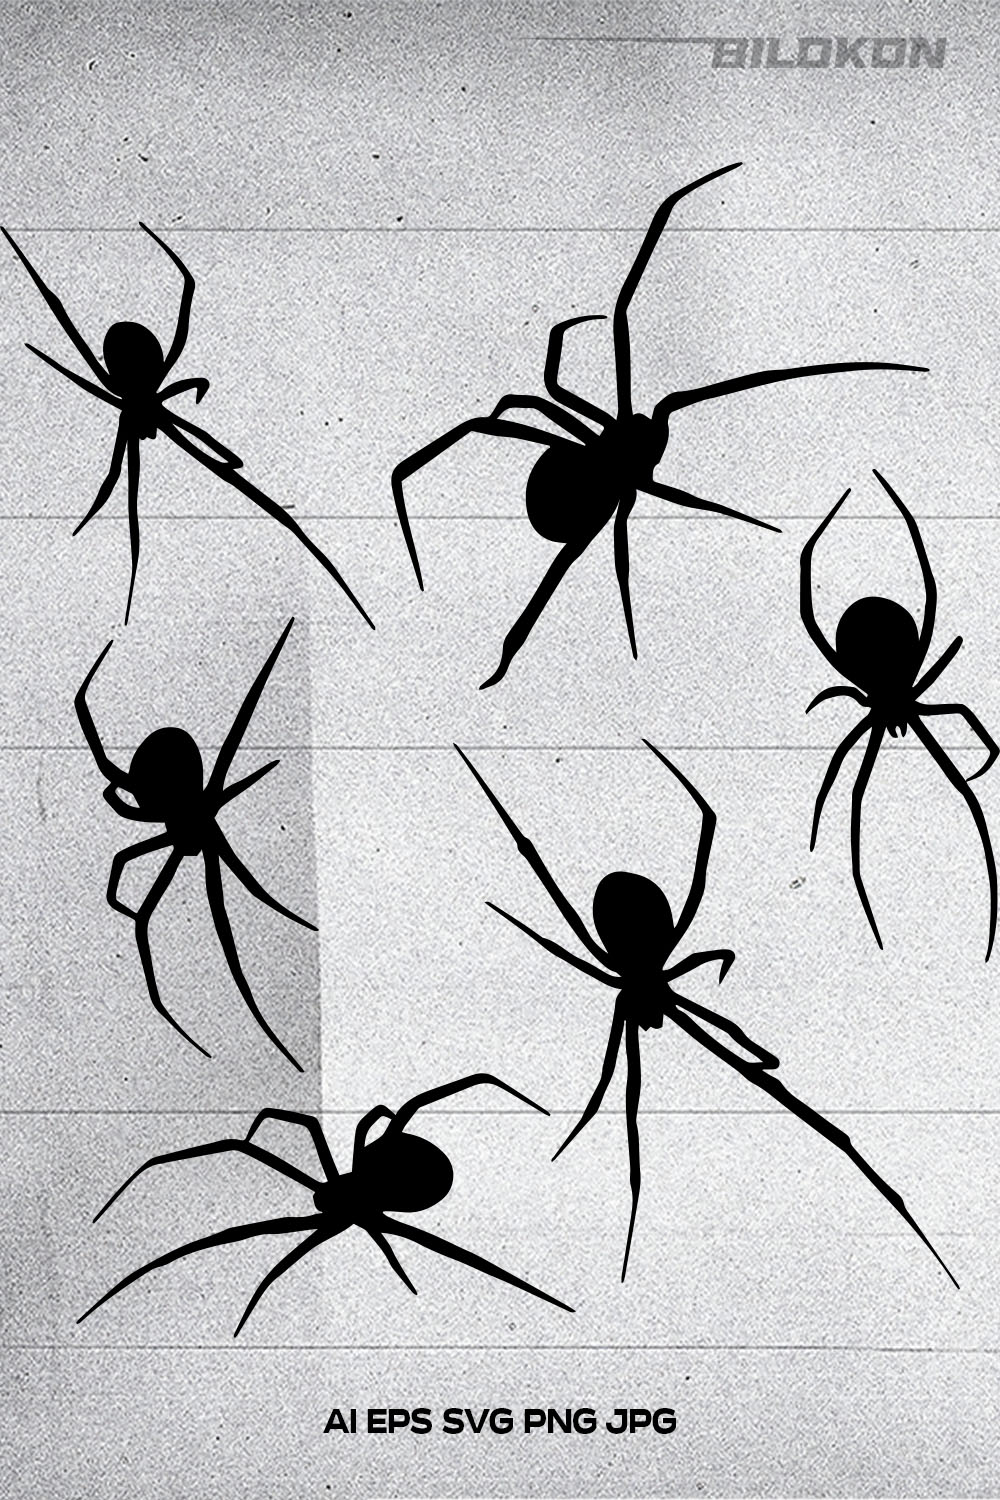 Group of black spider silhouettes against a white background.